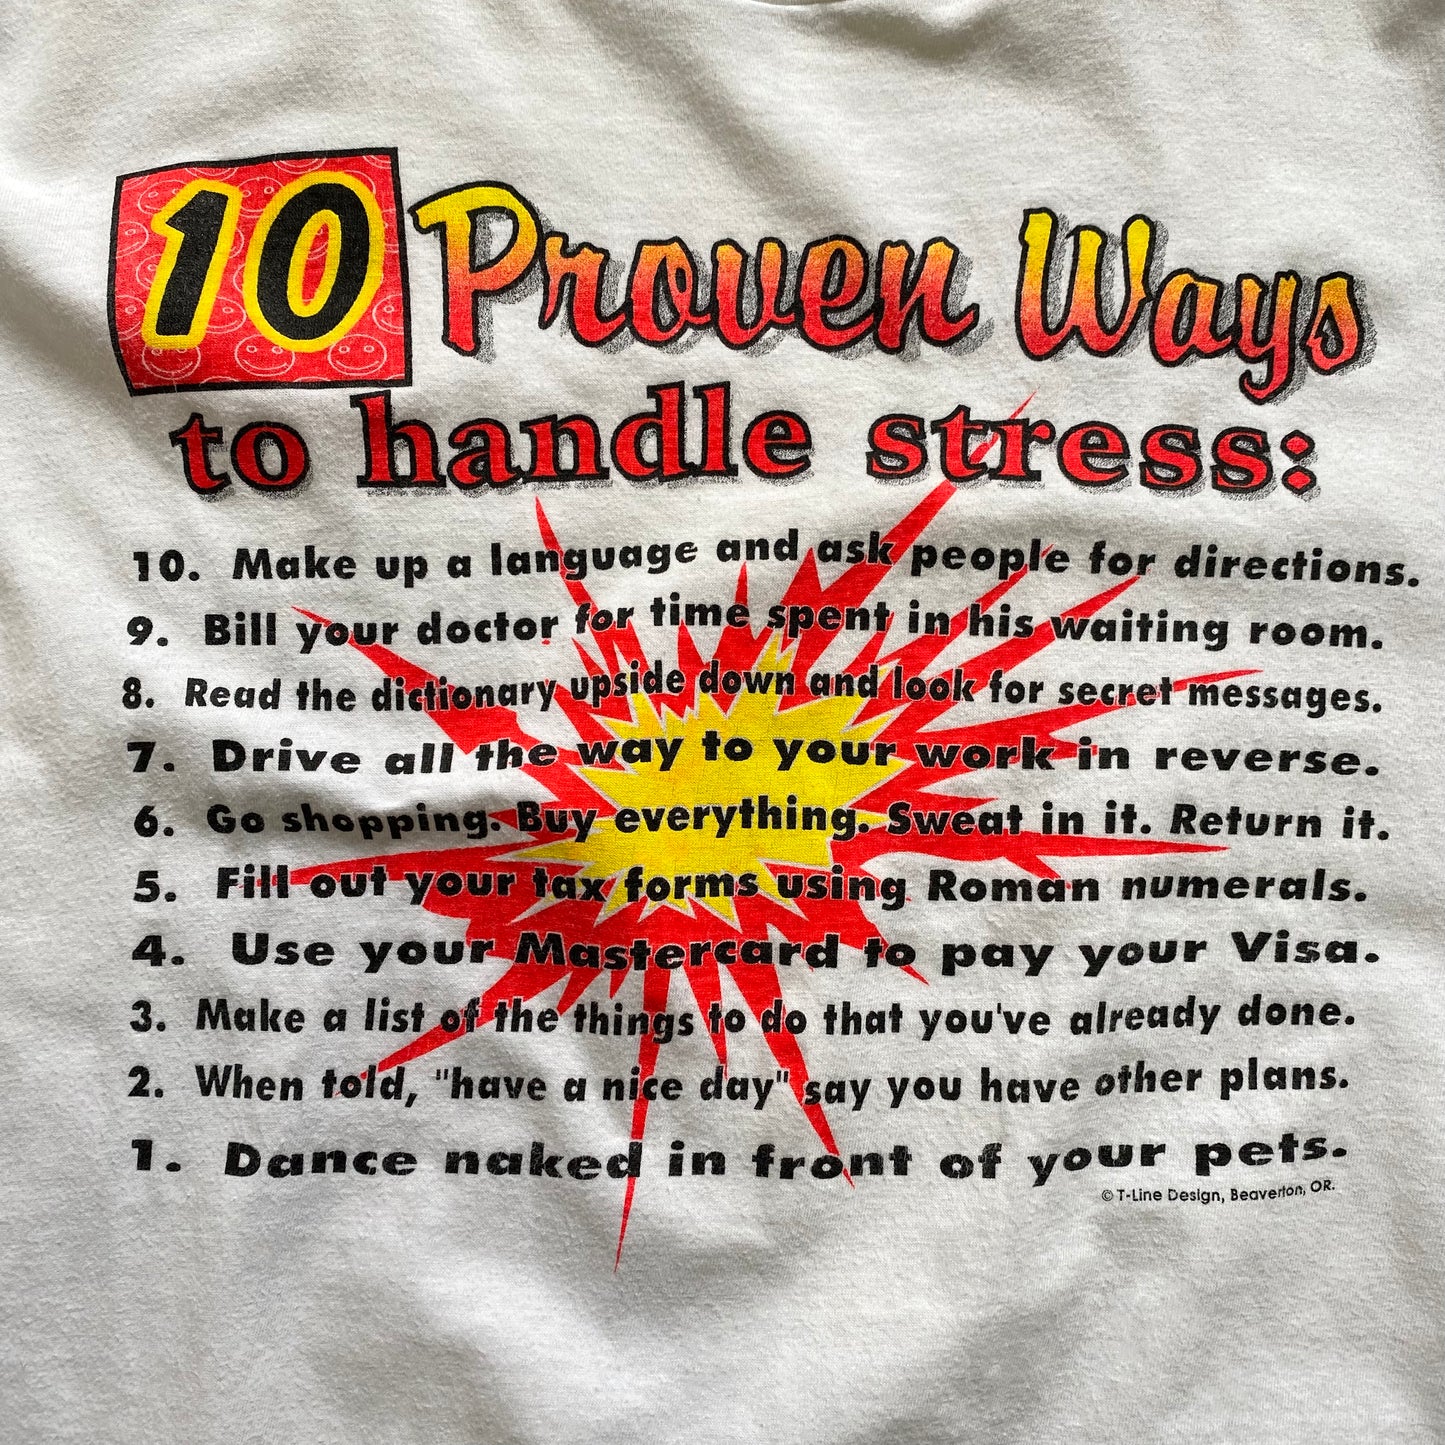 90’s Proven Ways to handle stress! T-SHIRT